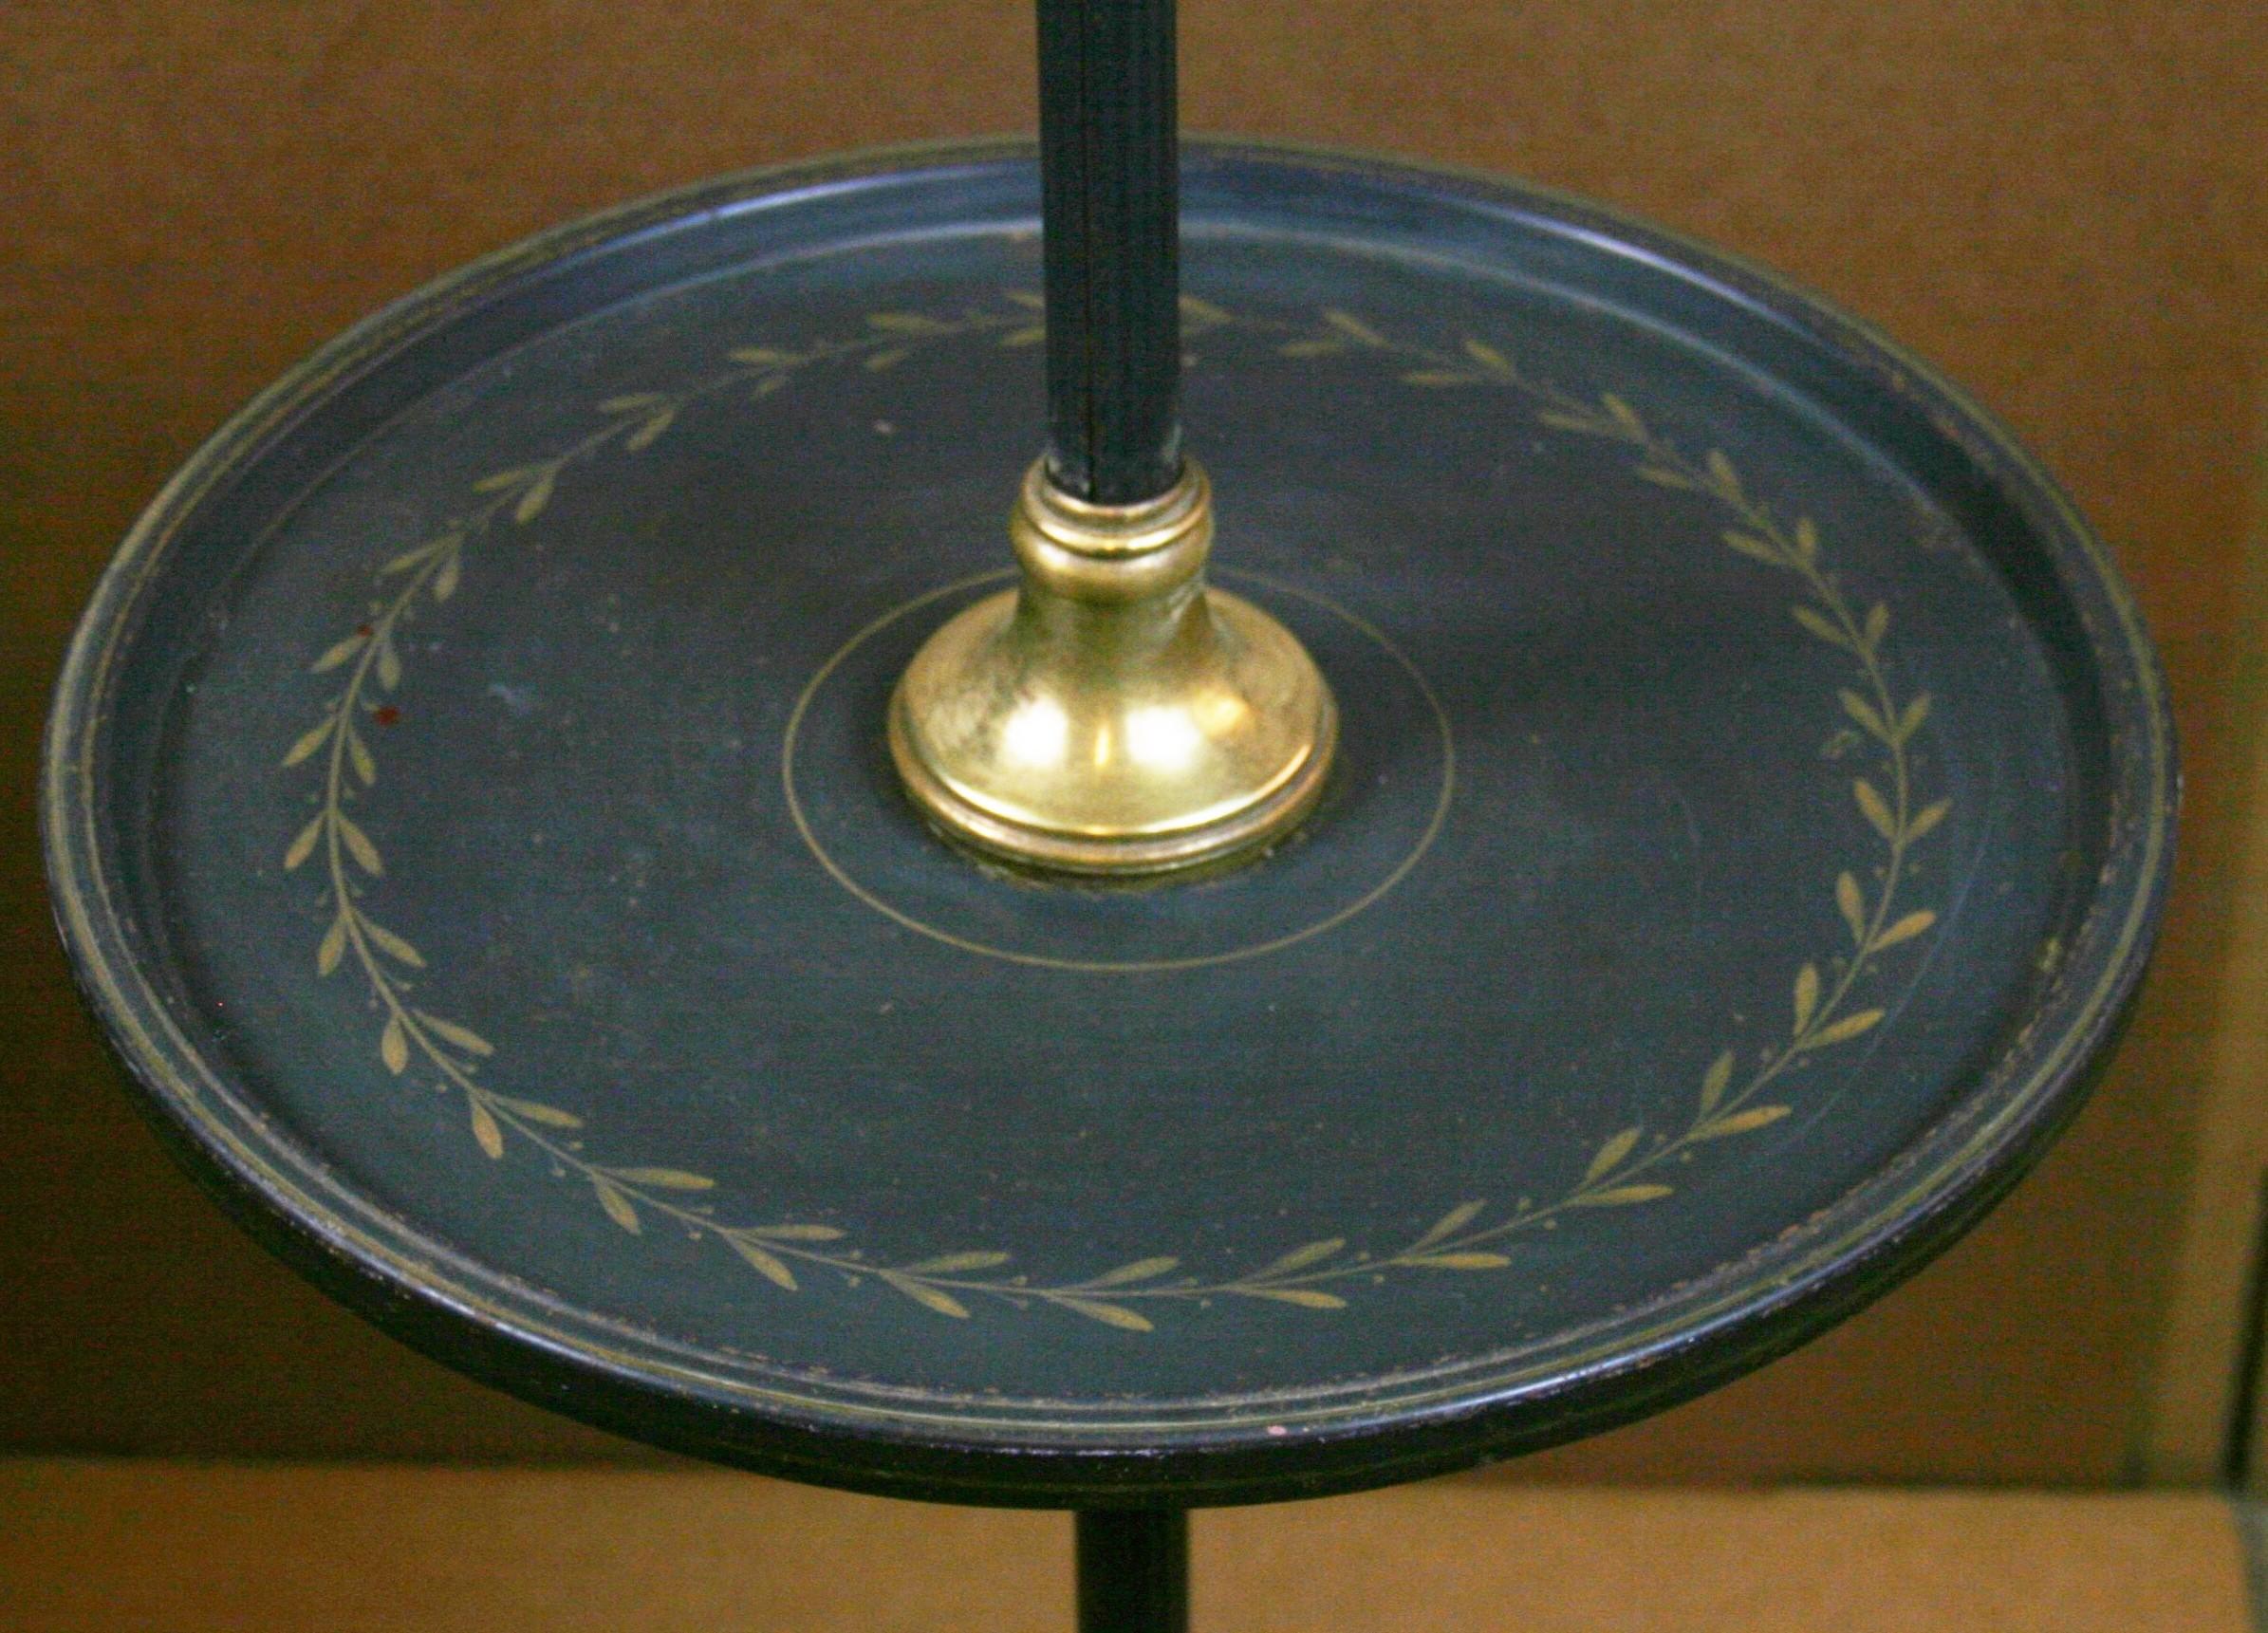 vintage brass floor lamp with table